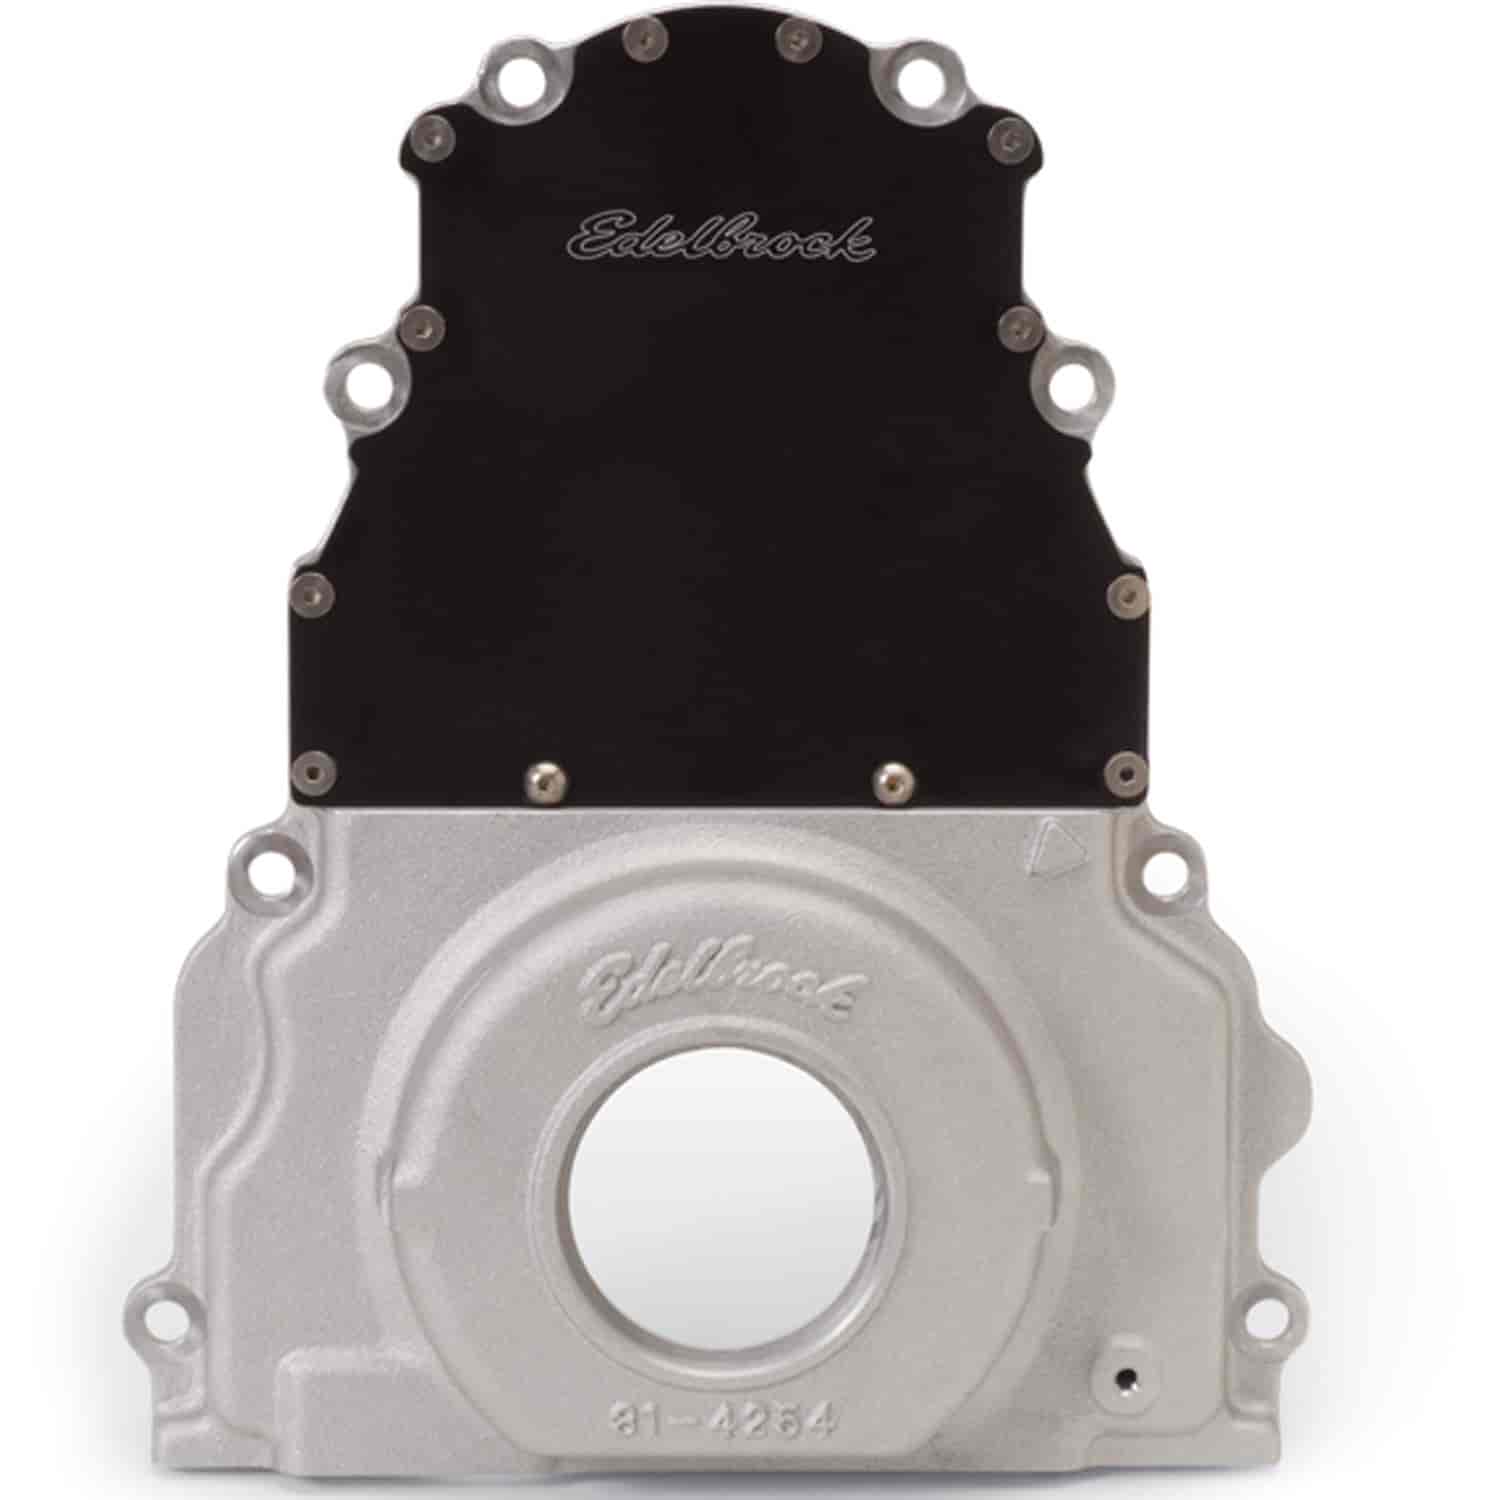 Timing Cover for Gen III LS with Rear